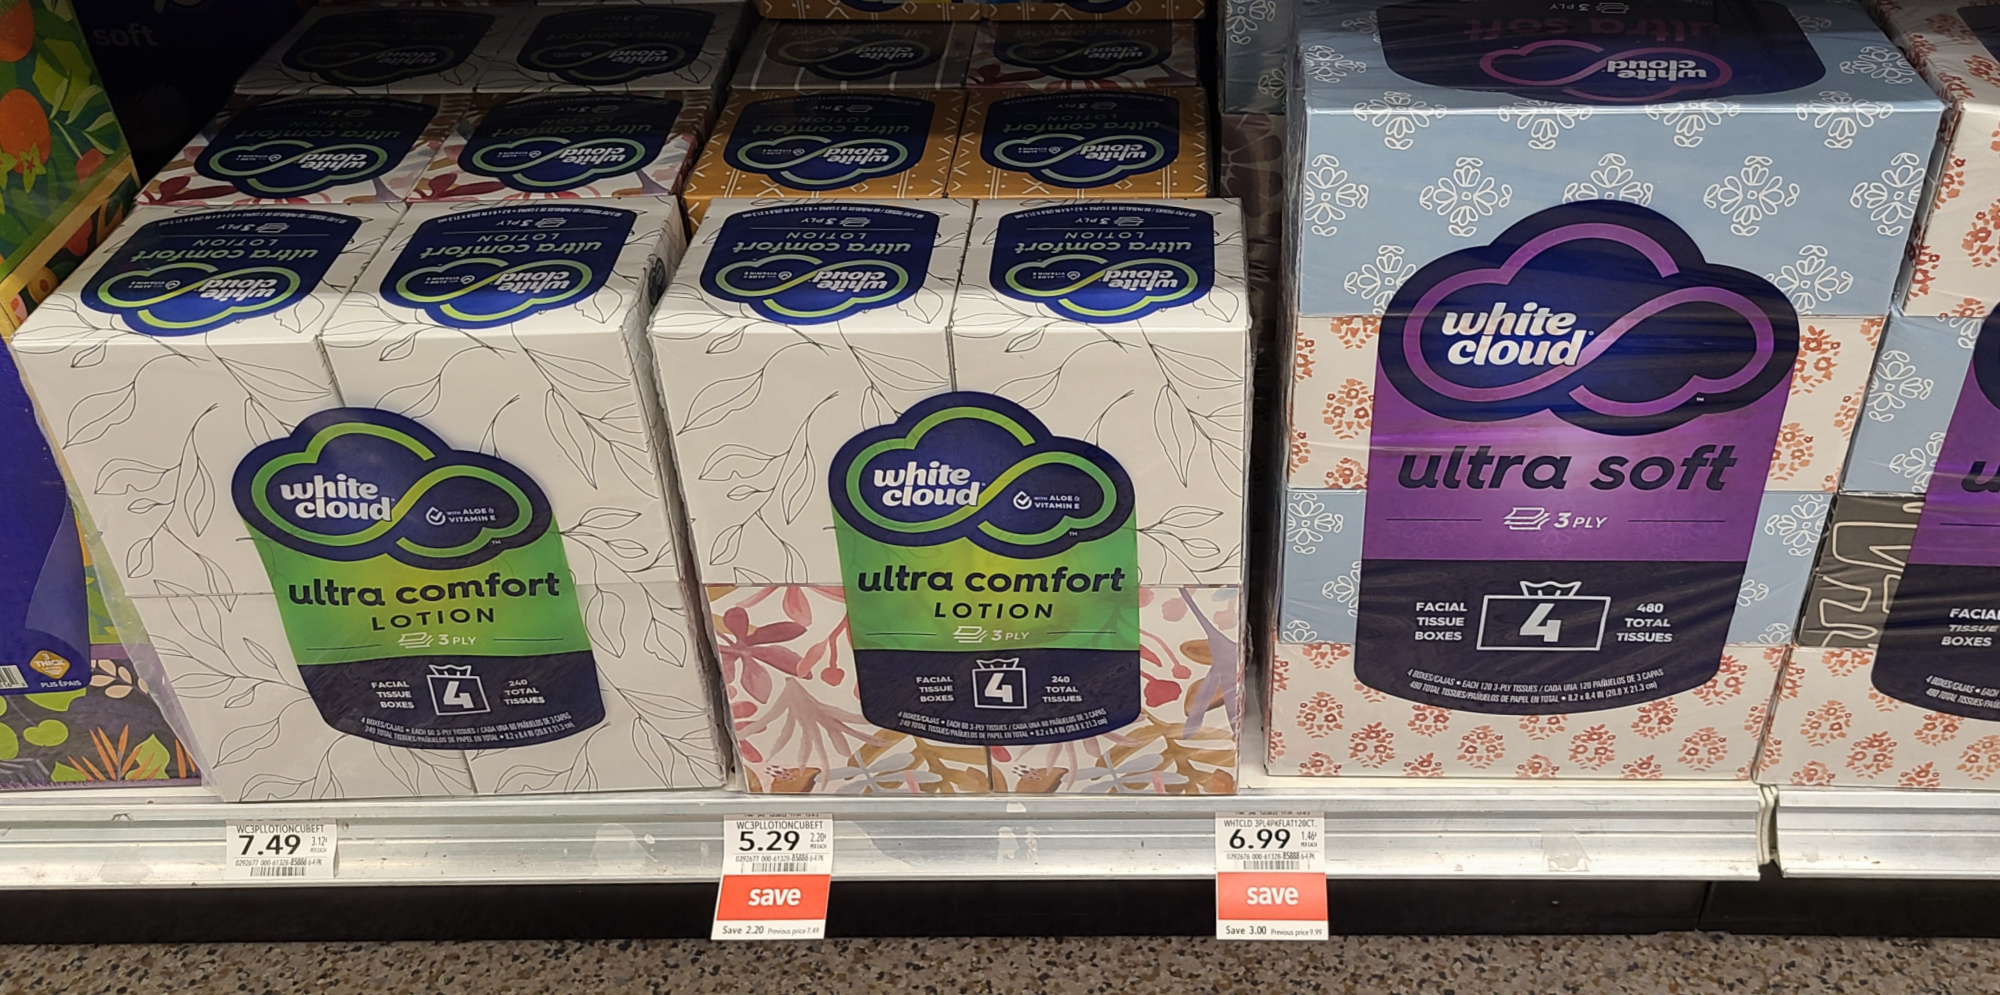 Stock Up On Hefty® Everyday™ Foam Plates At Publix – Buy One, Get One FREE!  - iHeartPublix